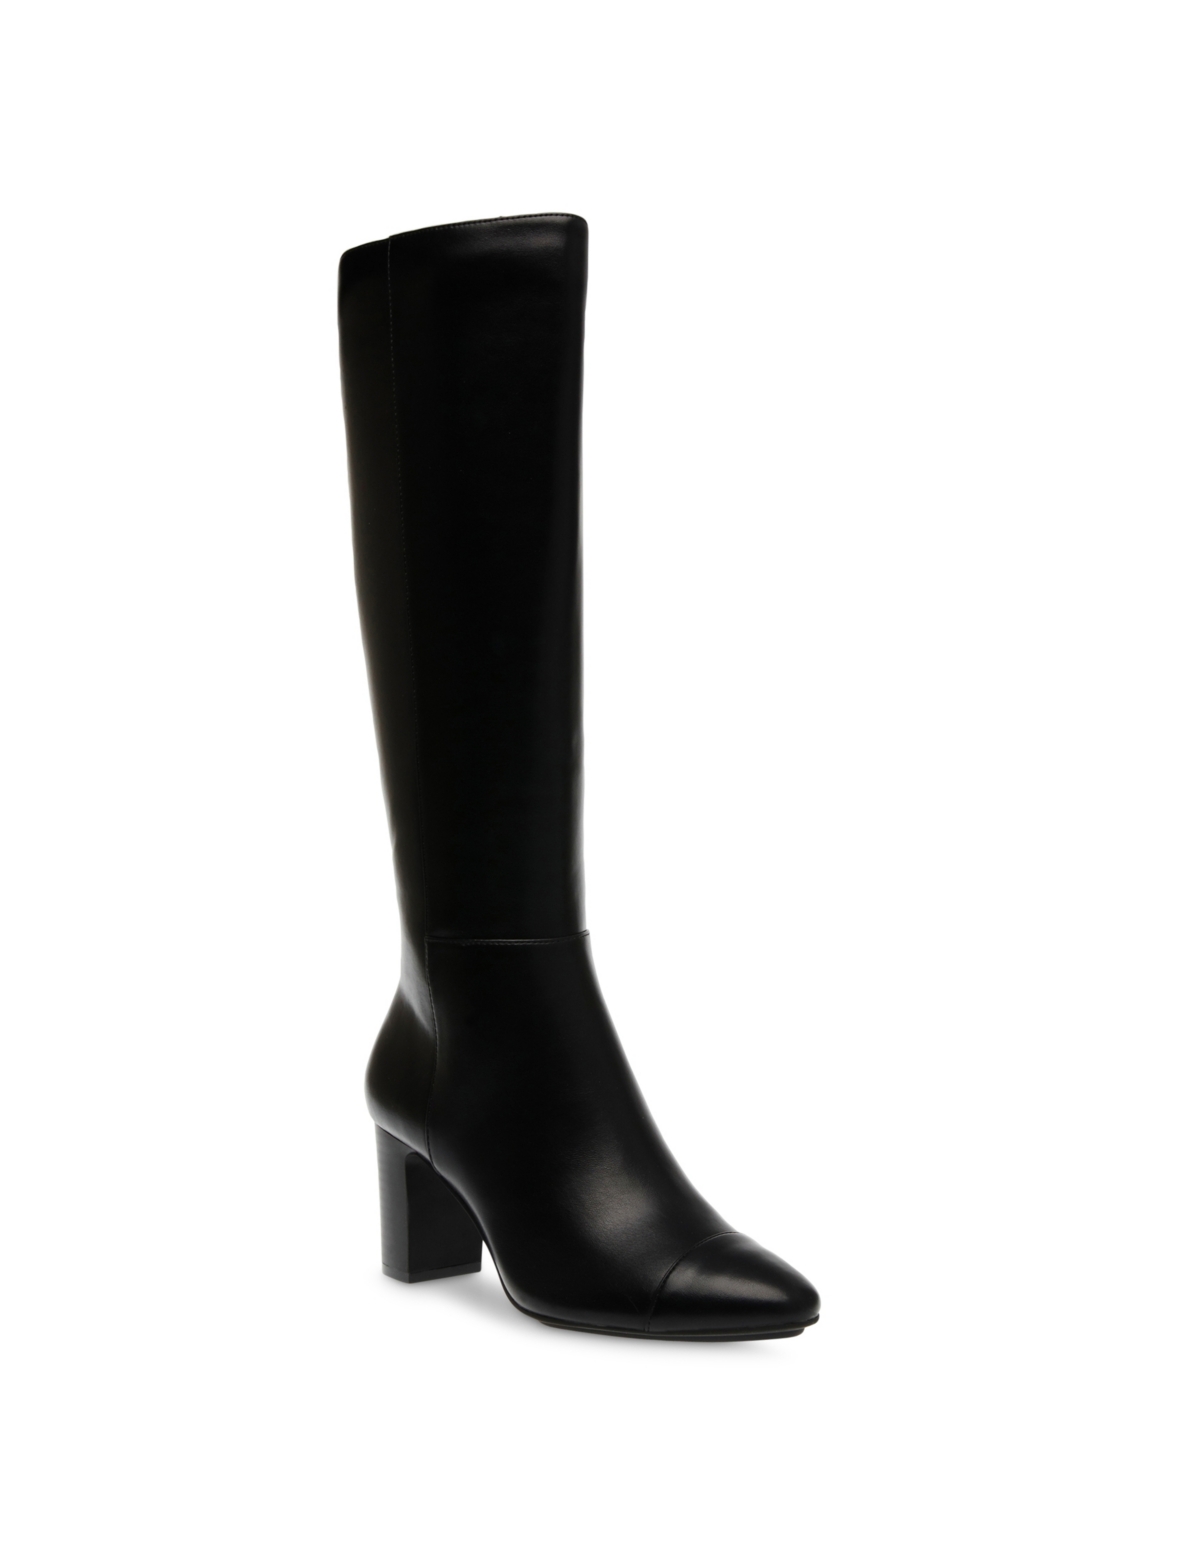 Women's Spencer Pointed Toe Knee High Boots - Black Smooth